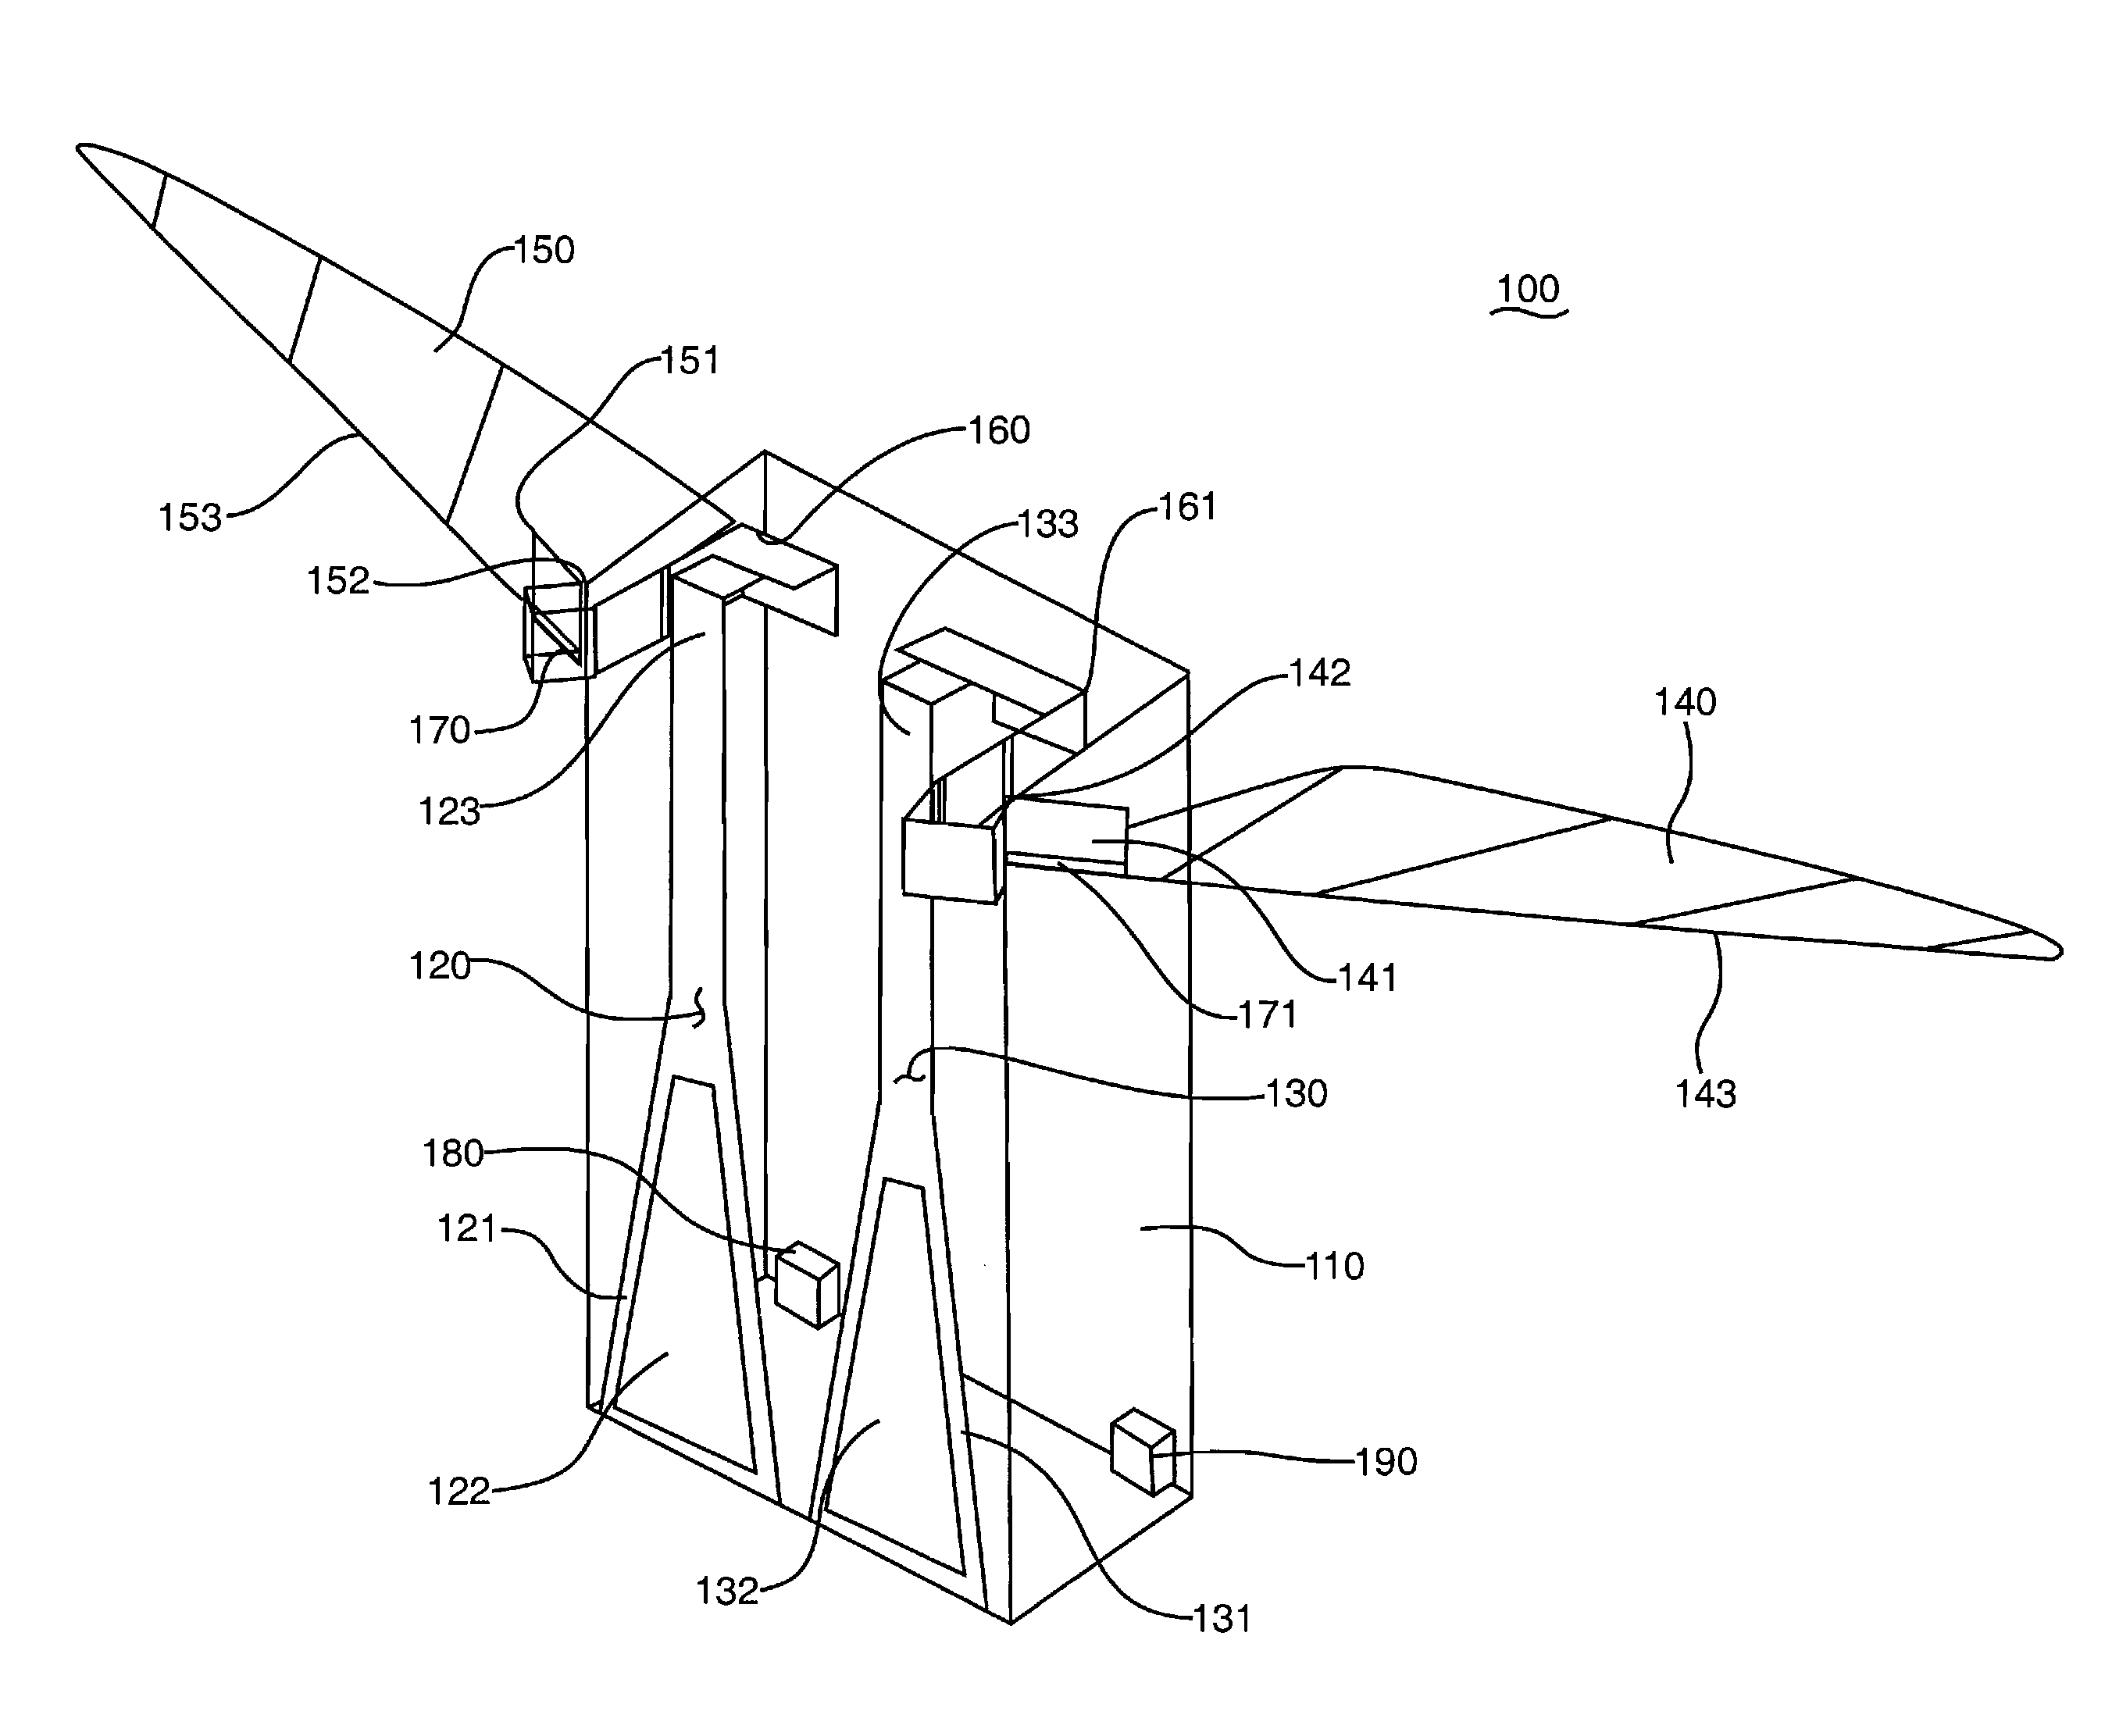 Method for shaping wing velocity profiles for control of flapping wing micro air vehicles